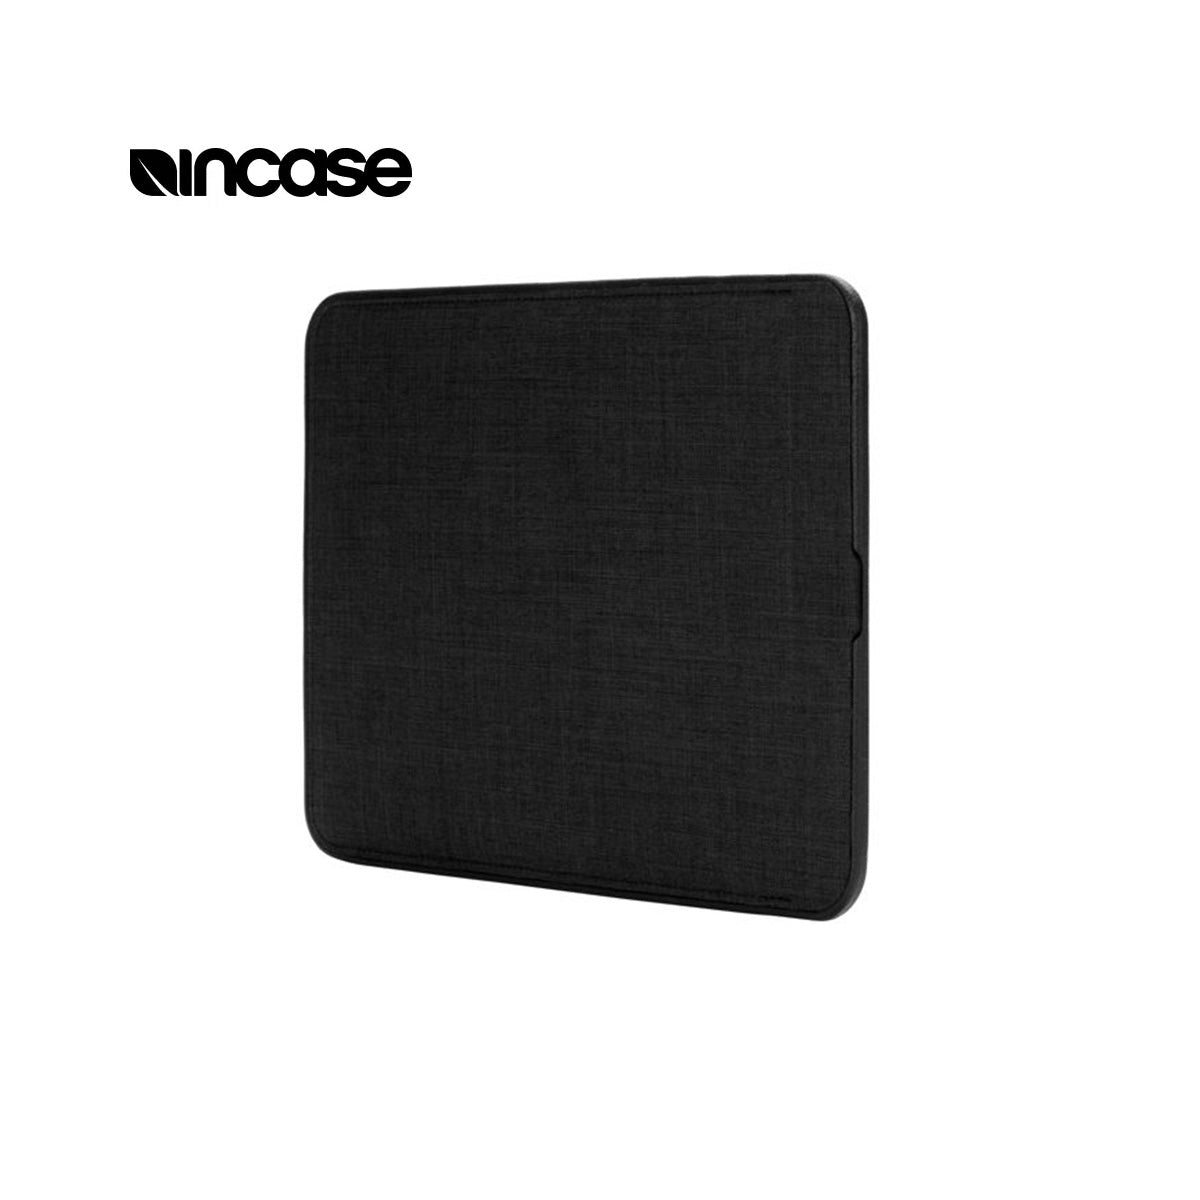 Incase ICON Sleeve for MacBook for MacBook Pro/Air 13″